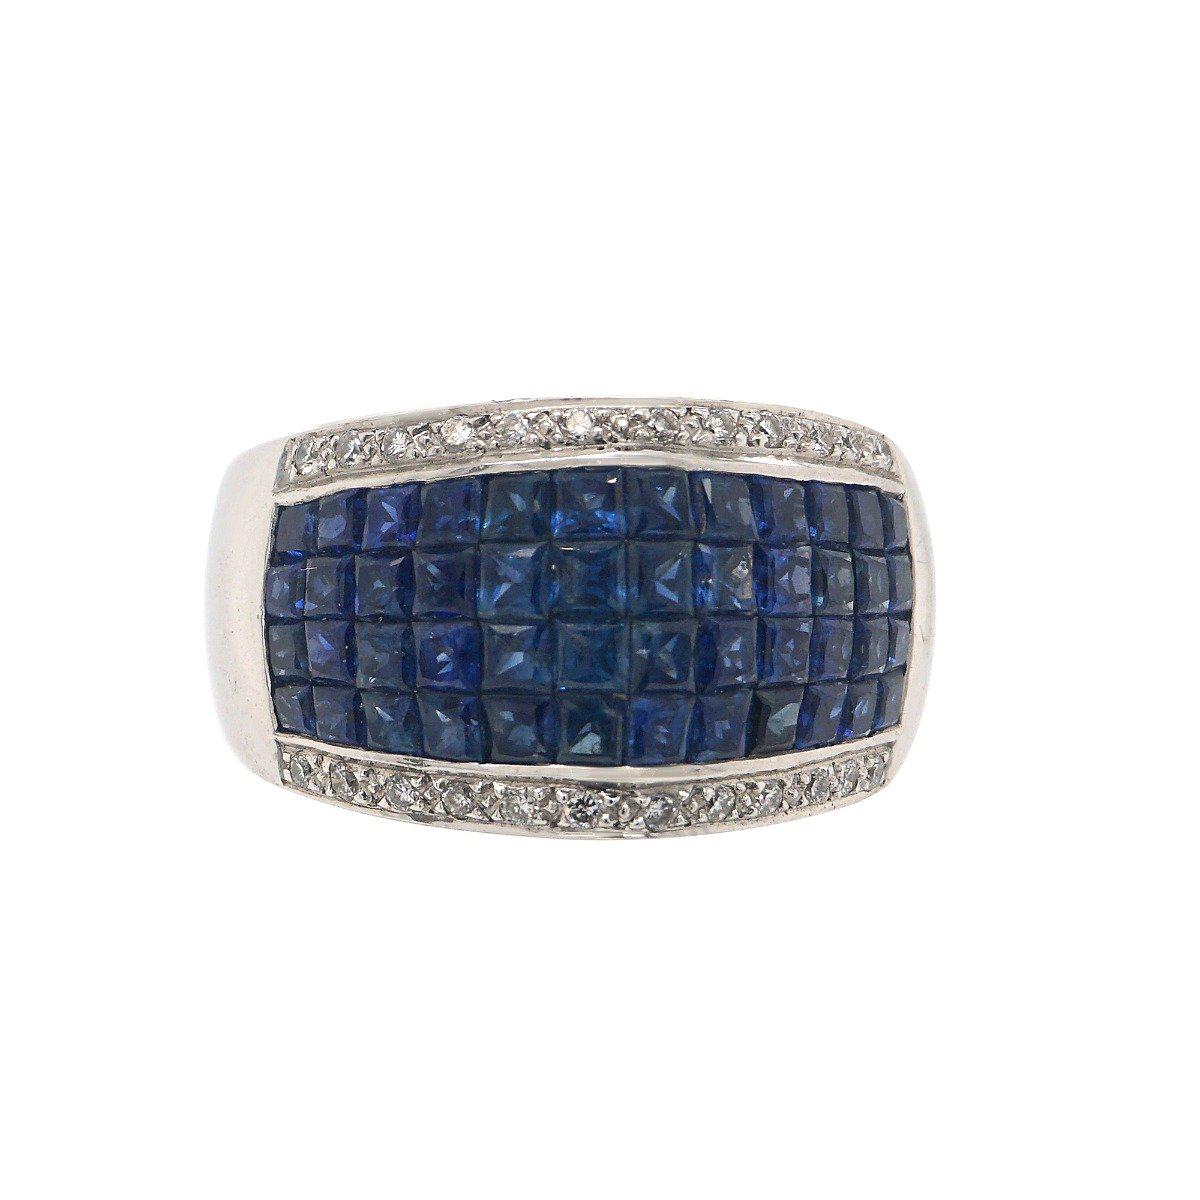 18 Karat White Gold Mystery Set Sapphire Estate Band Ring For Sale